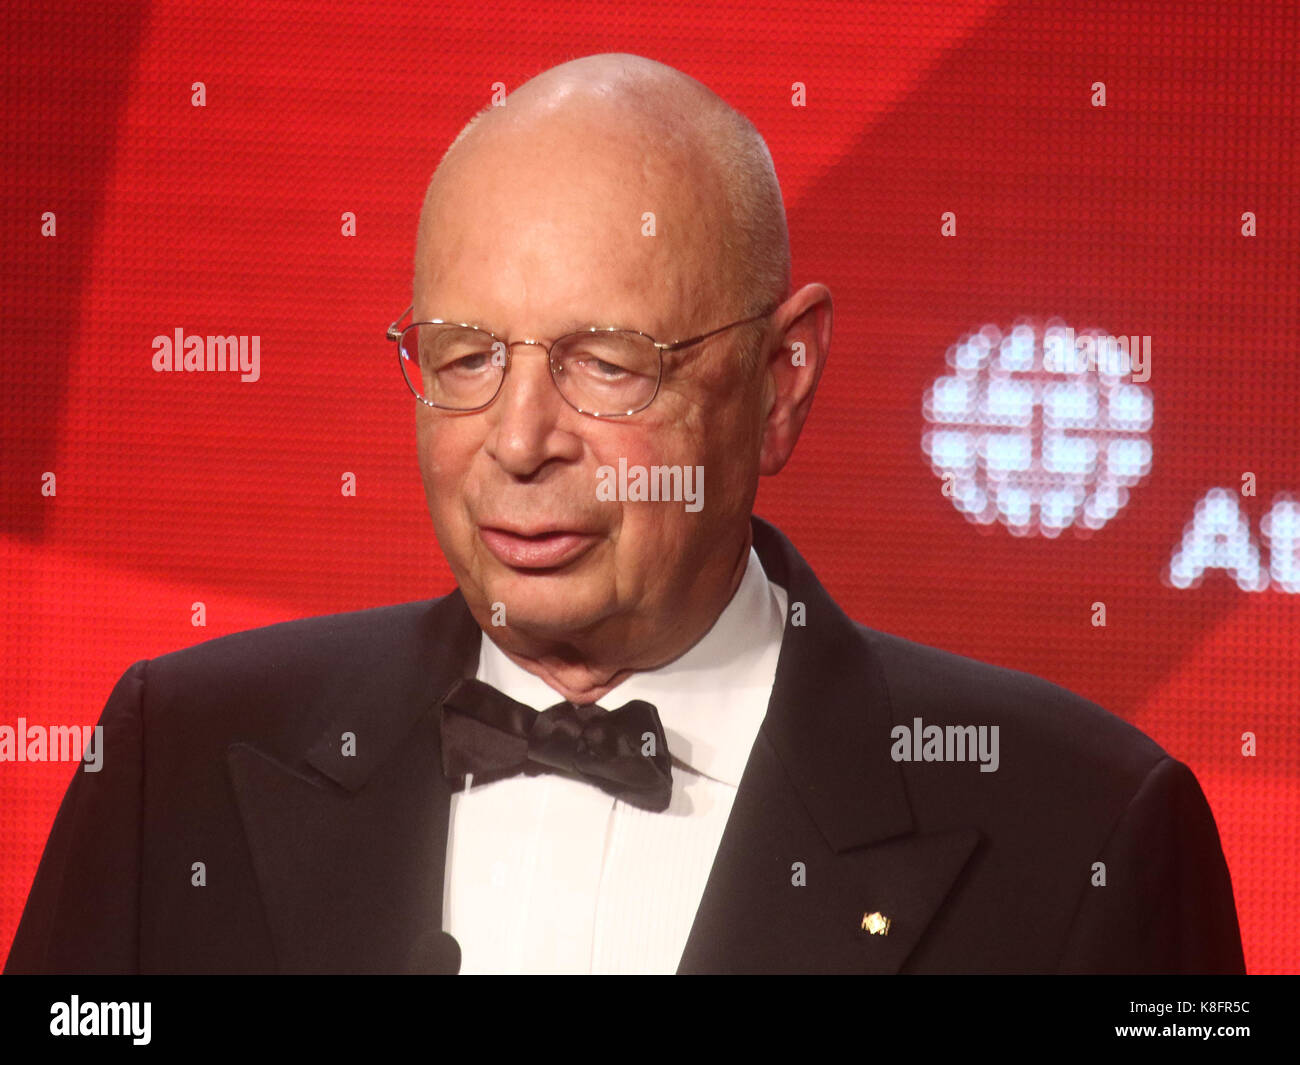 New York, New York, USA. 19th Sep, 2017. Founder and Executive Chairman of the World Economic Forum, presenter KLAUS SCHWAB attends the Atlantic Council 2017 Global Citizen Awards held at the Intrepid Sea, Air, & Space Museum. Credit: Nancy Kaszerman/ZUMA Wire/Alamy Live News Stock Photo